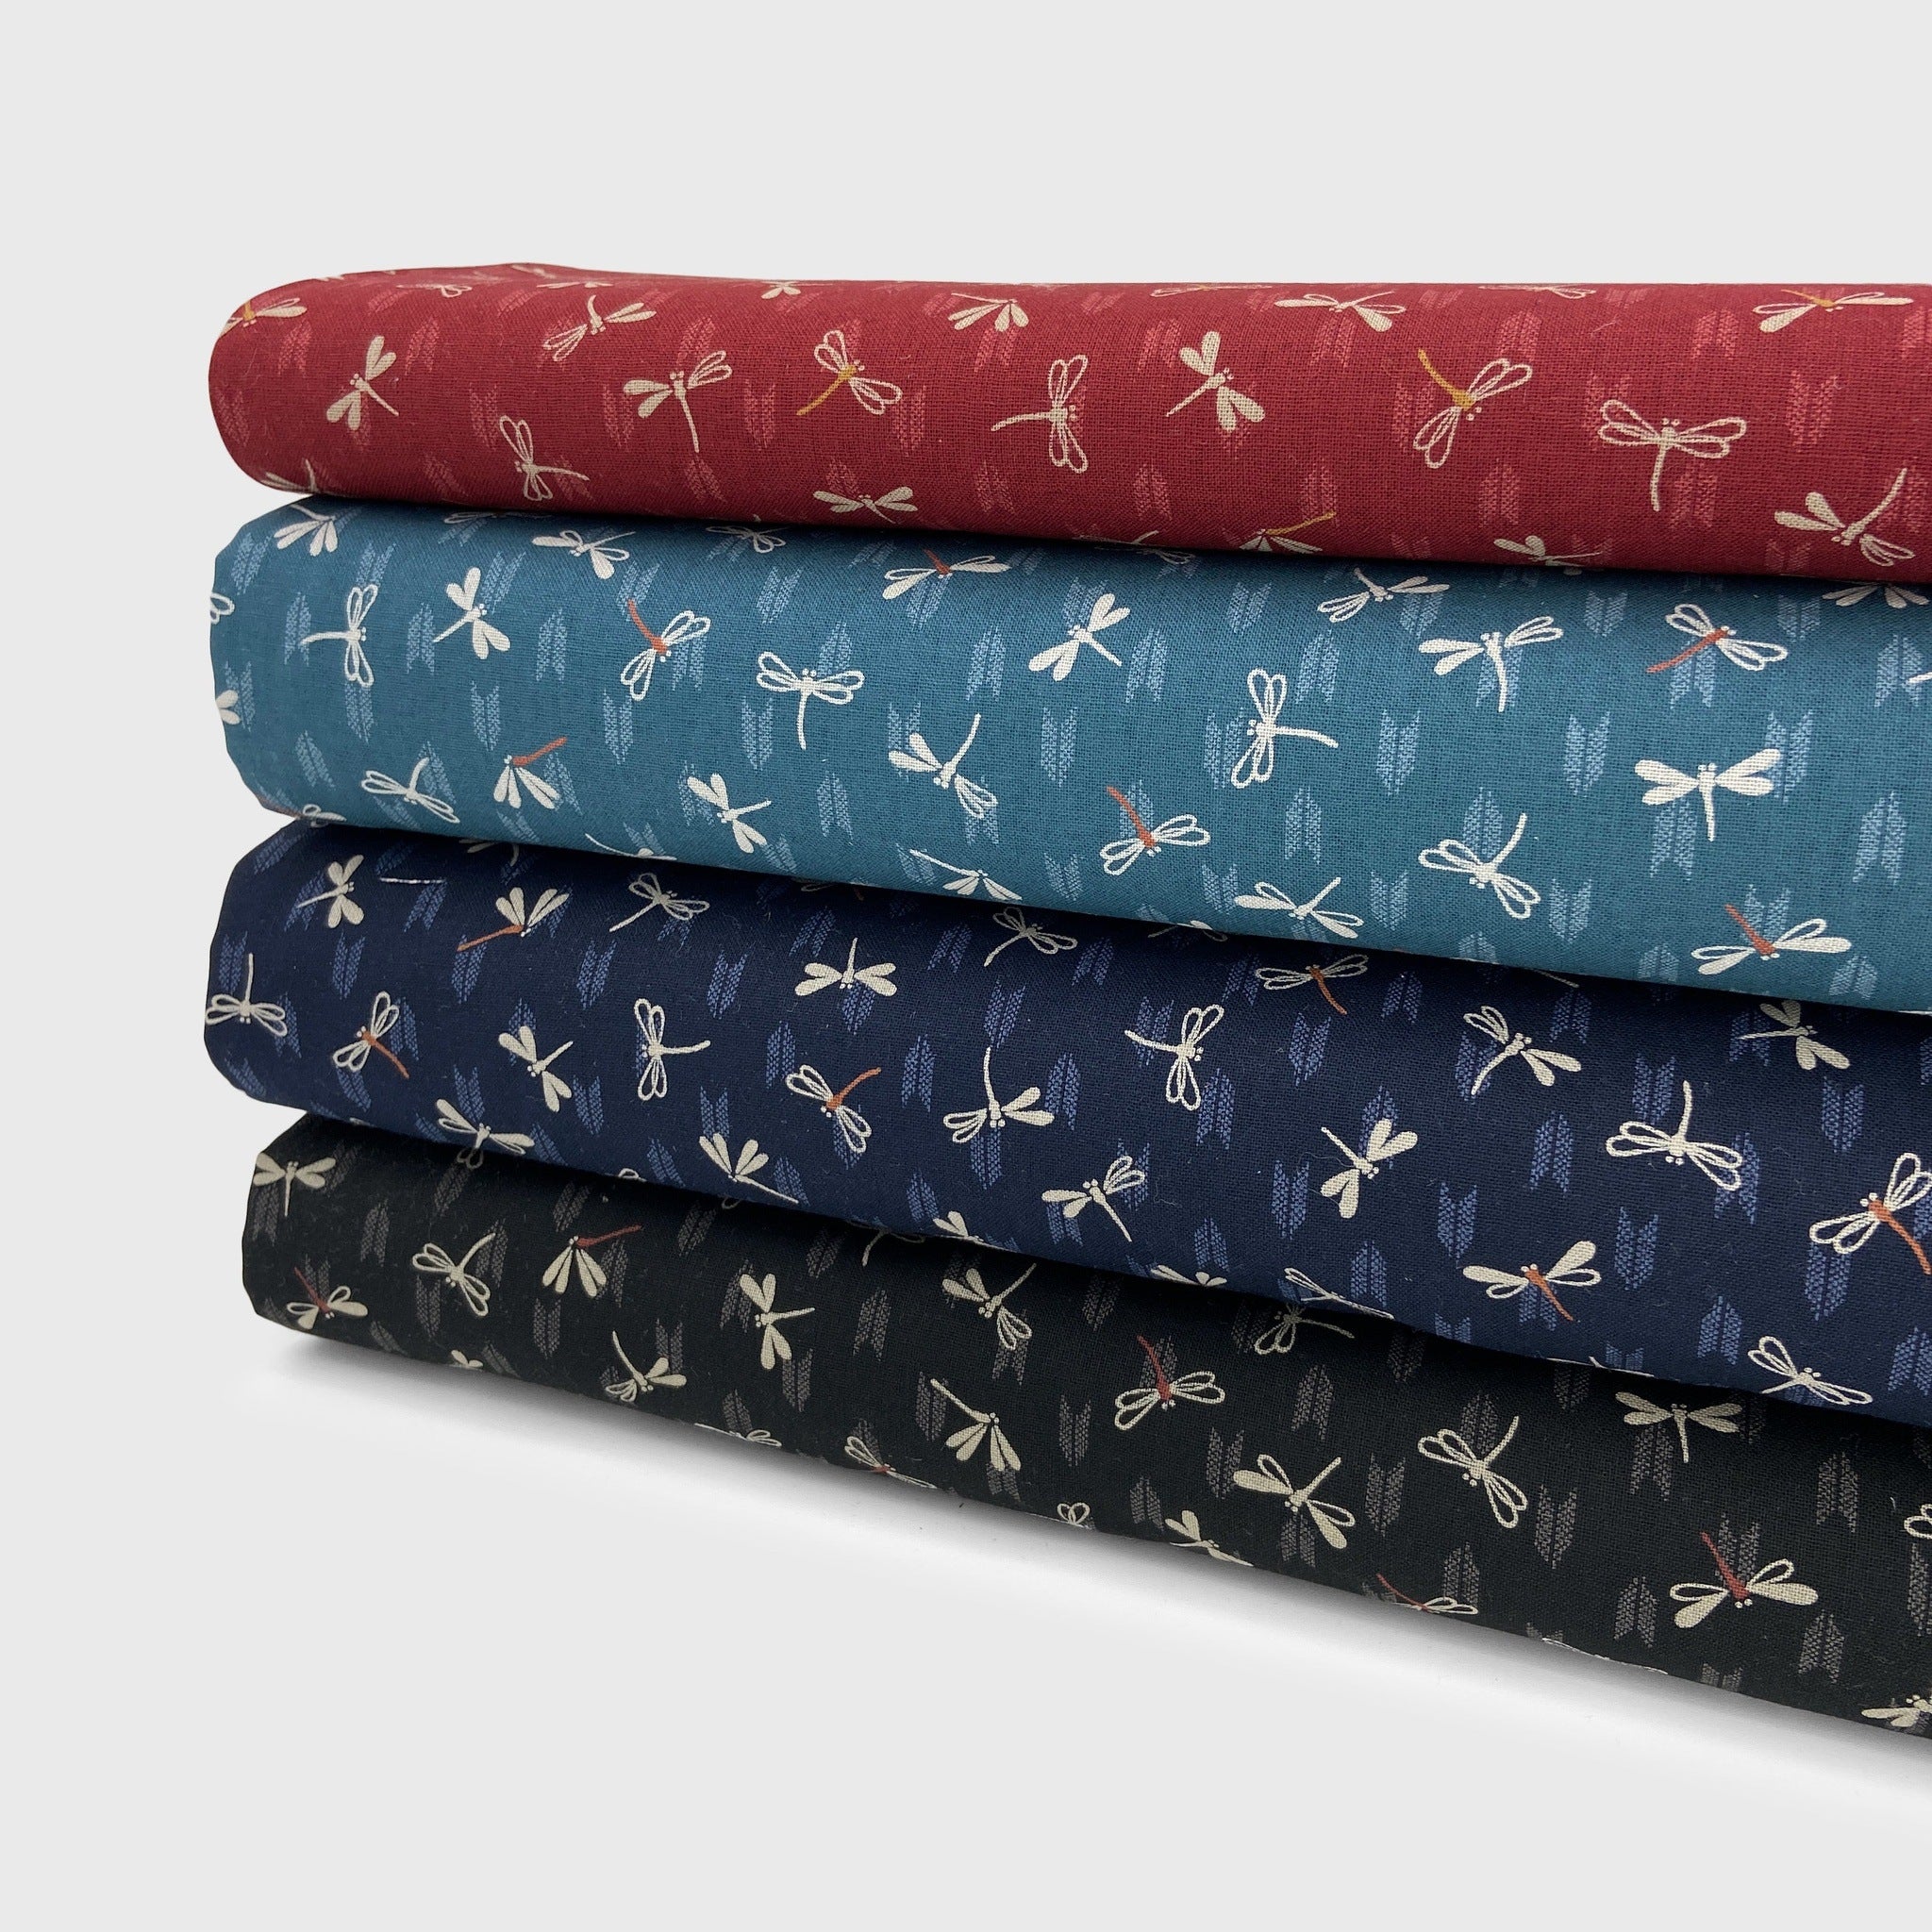 Japanese Cotton Sheeting Print - Dragonflies with Arrows Red